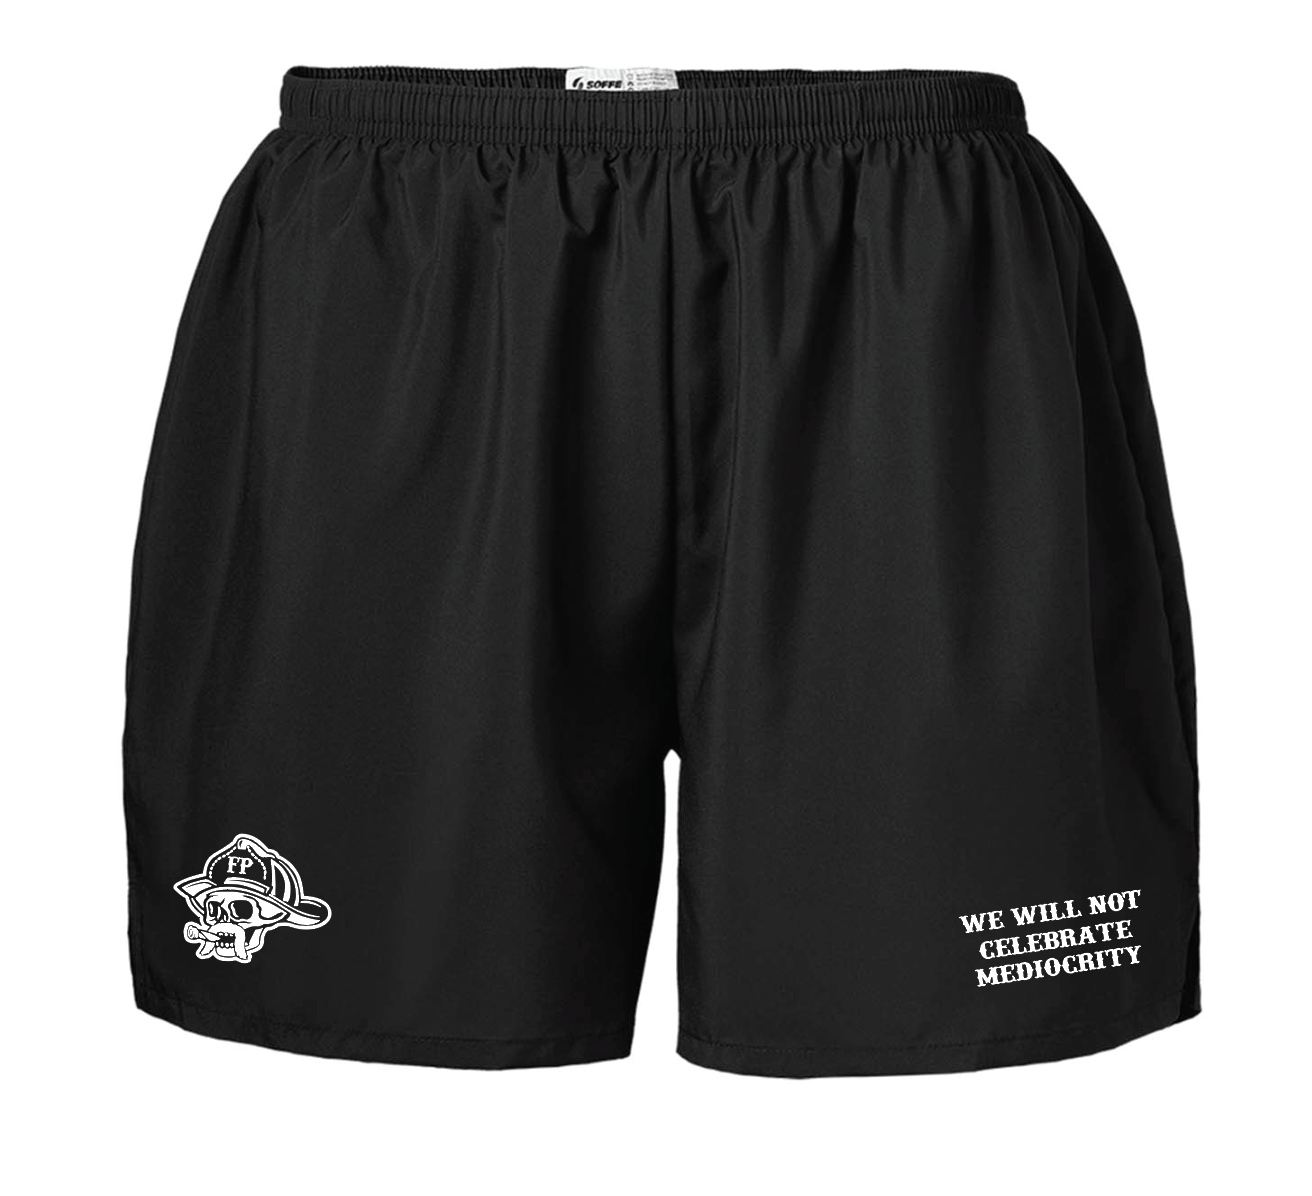 Gym Shorts- We Will Not Celebrate Mediocrity - Firehouse Pride